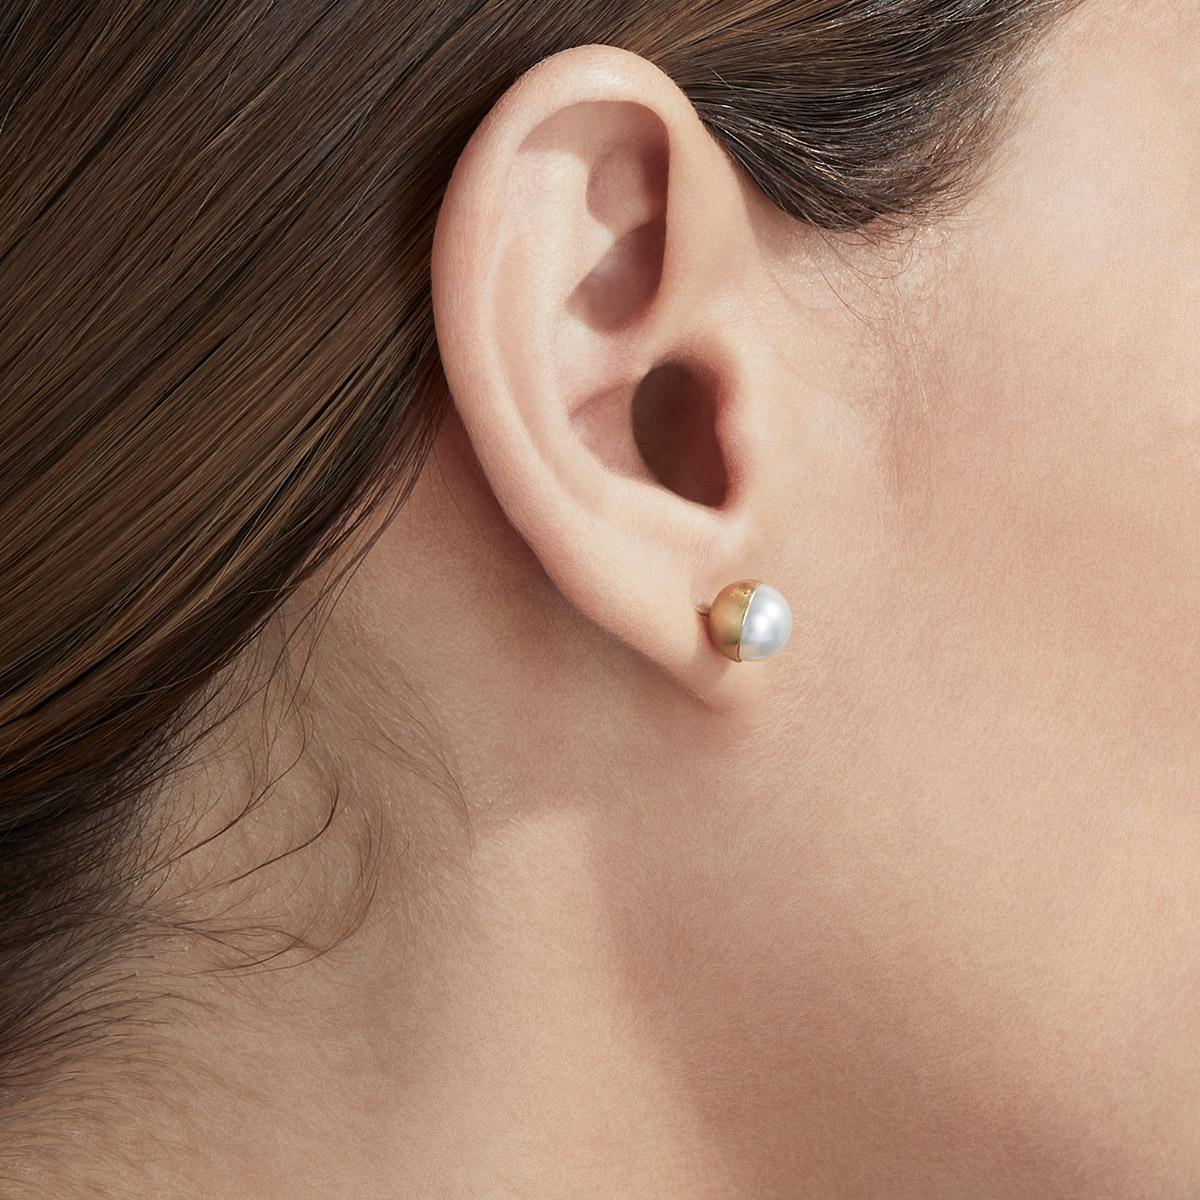 Akoya pearls are encased in a half sphere of gold at 0 and 90 degree angles and placed on a post. Each comes with an 18 karat yellow gold earring back. 

Post length: 11mm
Earring back length: 7mm
Akoya pearl: 7mm
This item is sold as a pair
This